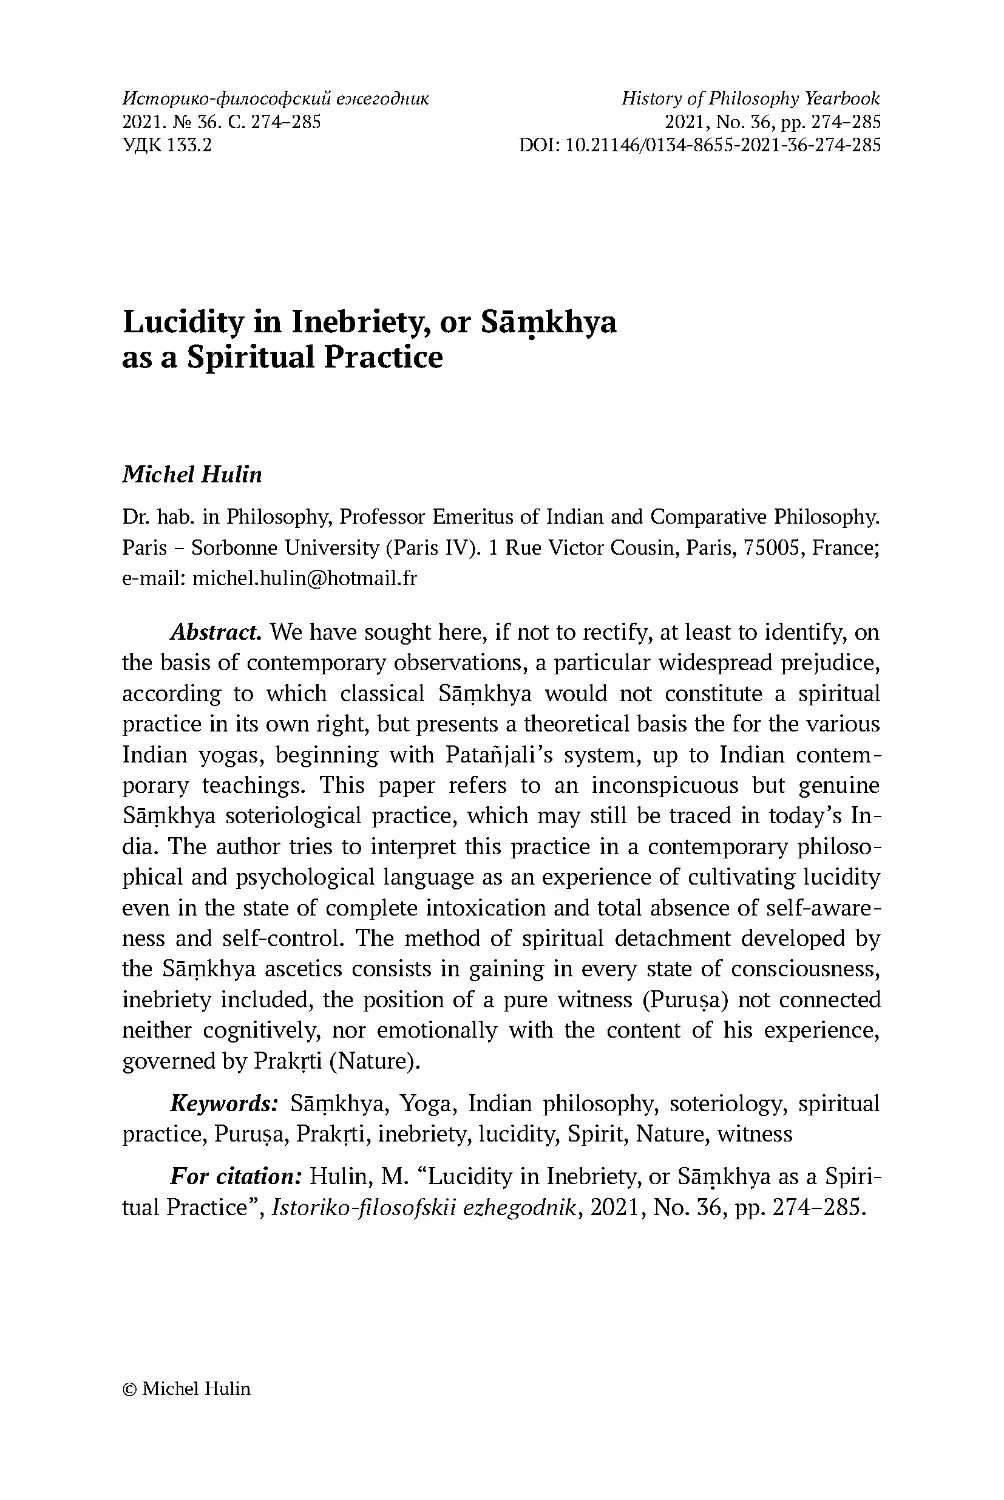 Lucidity in Inebriety, or Sāṃkhya as a Spiritual Practice